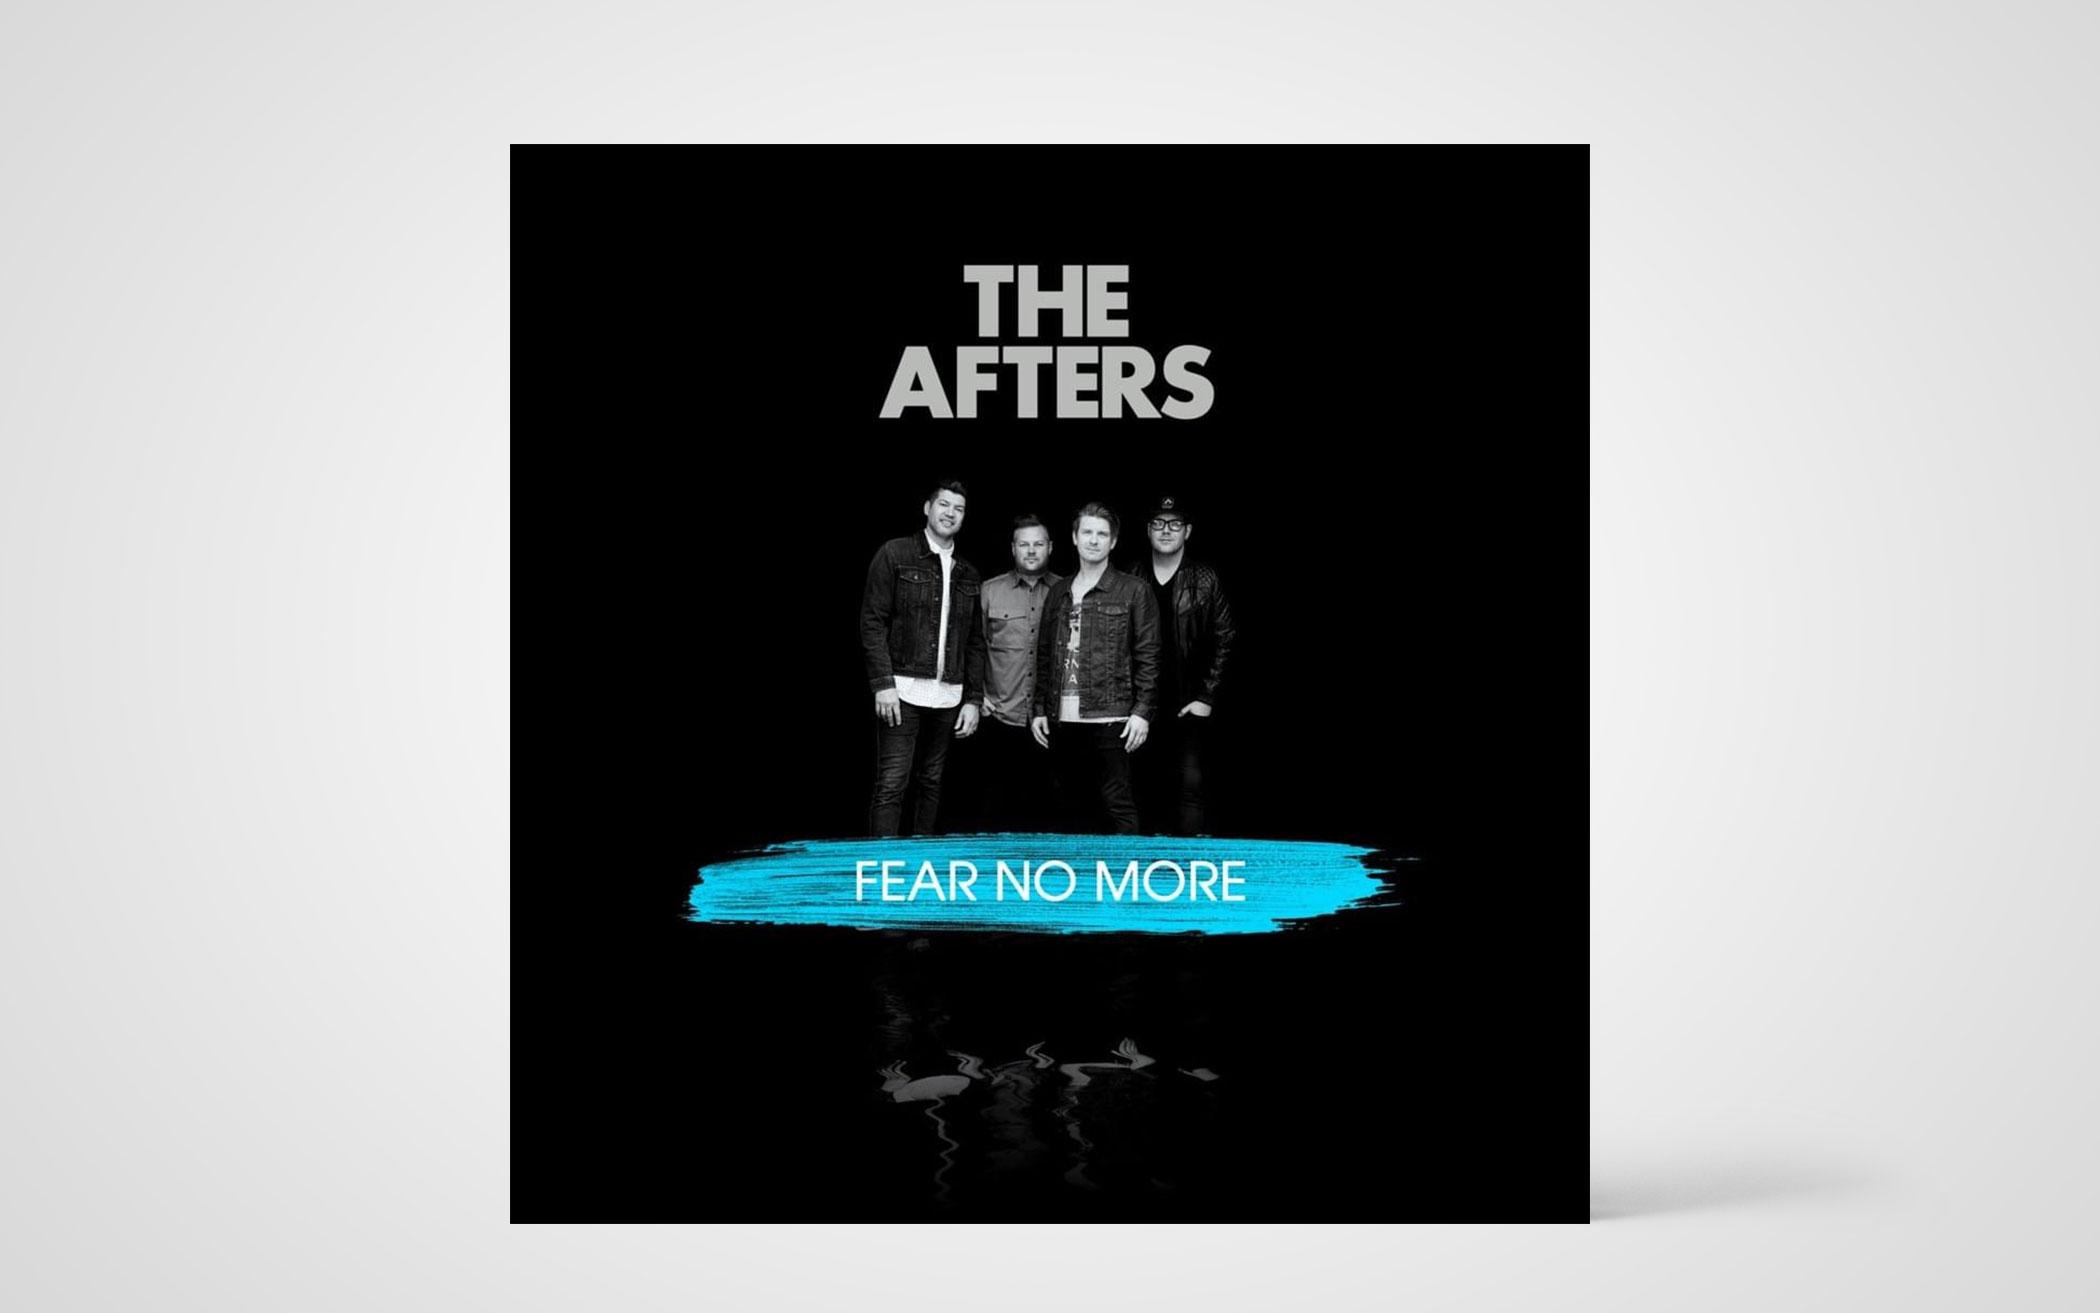 Fear No More by The Afters